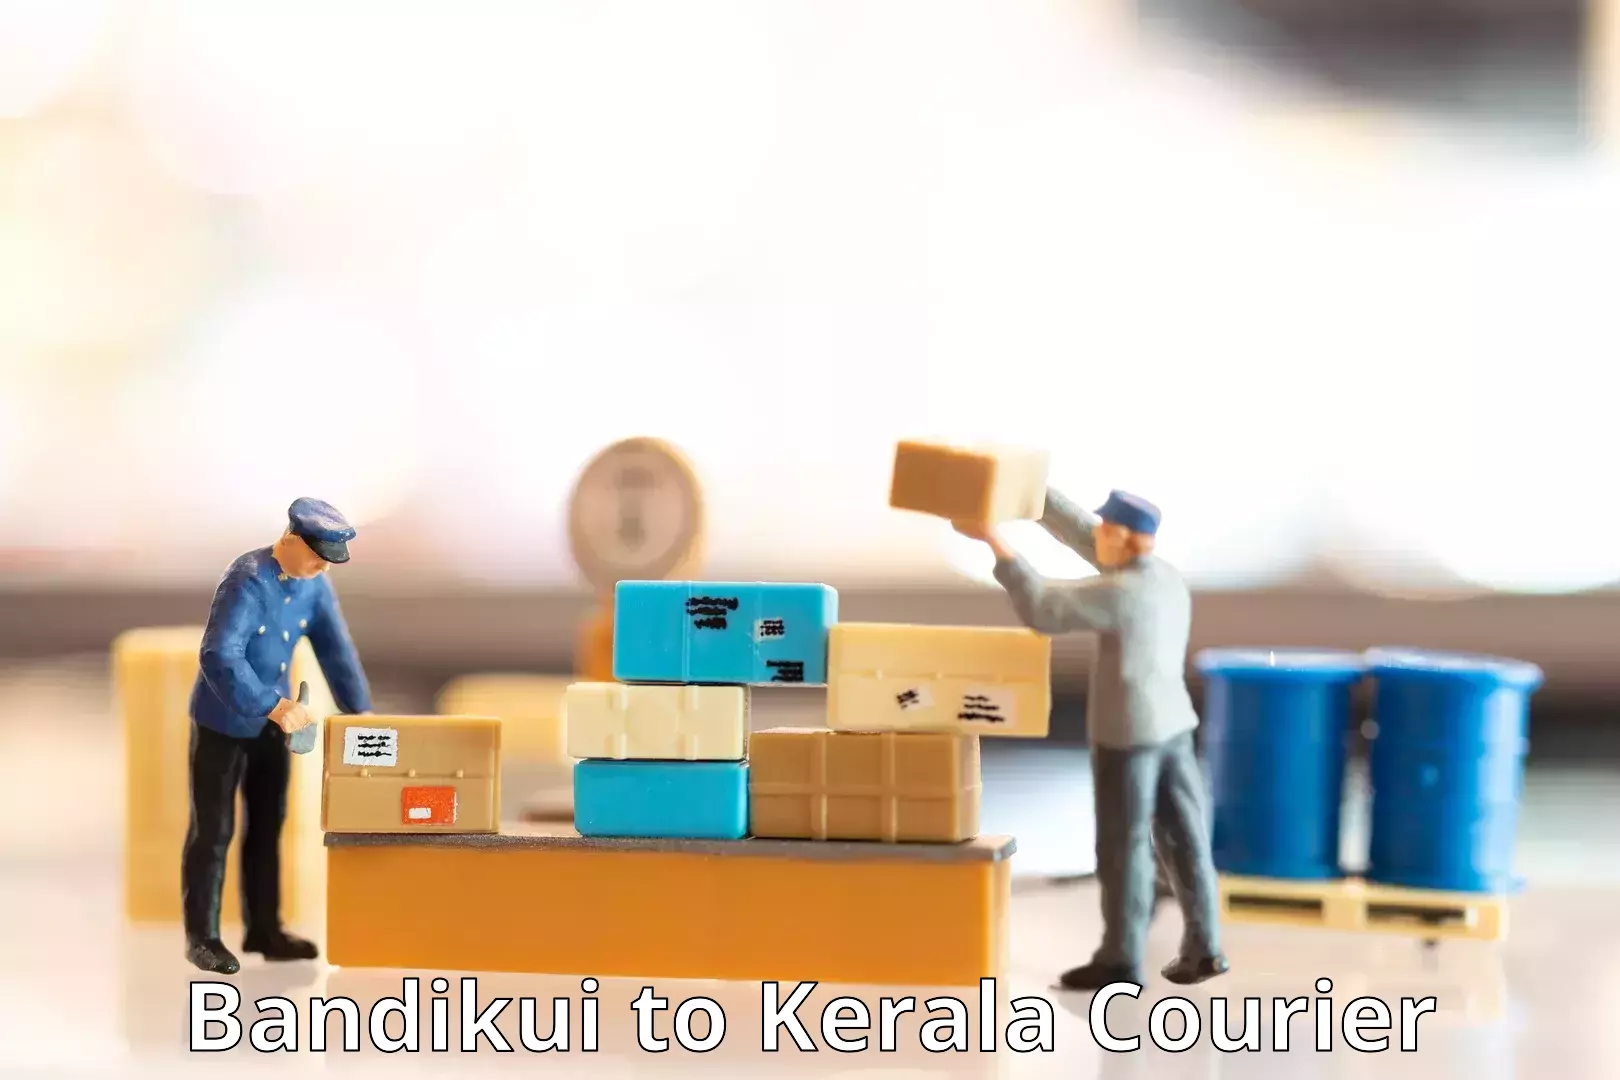 Flexible delivery scheduling in Bandikui to Vaikom